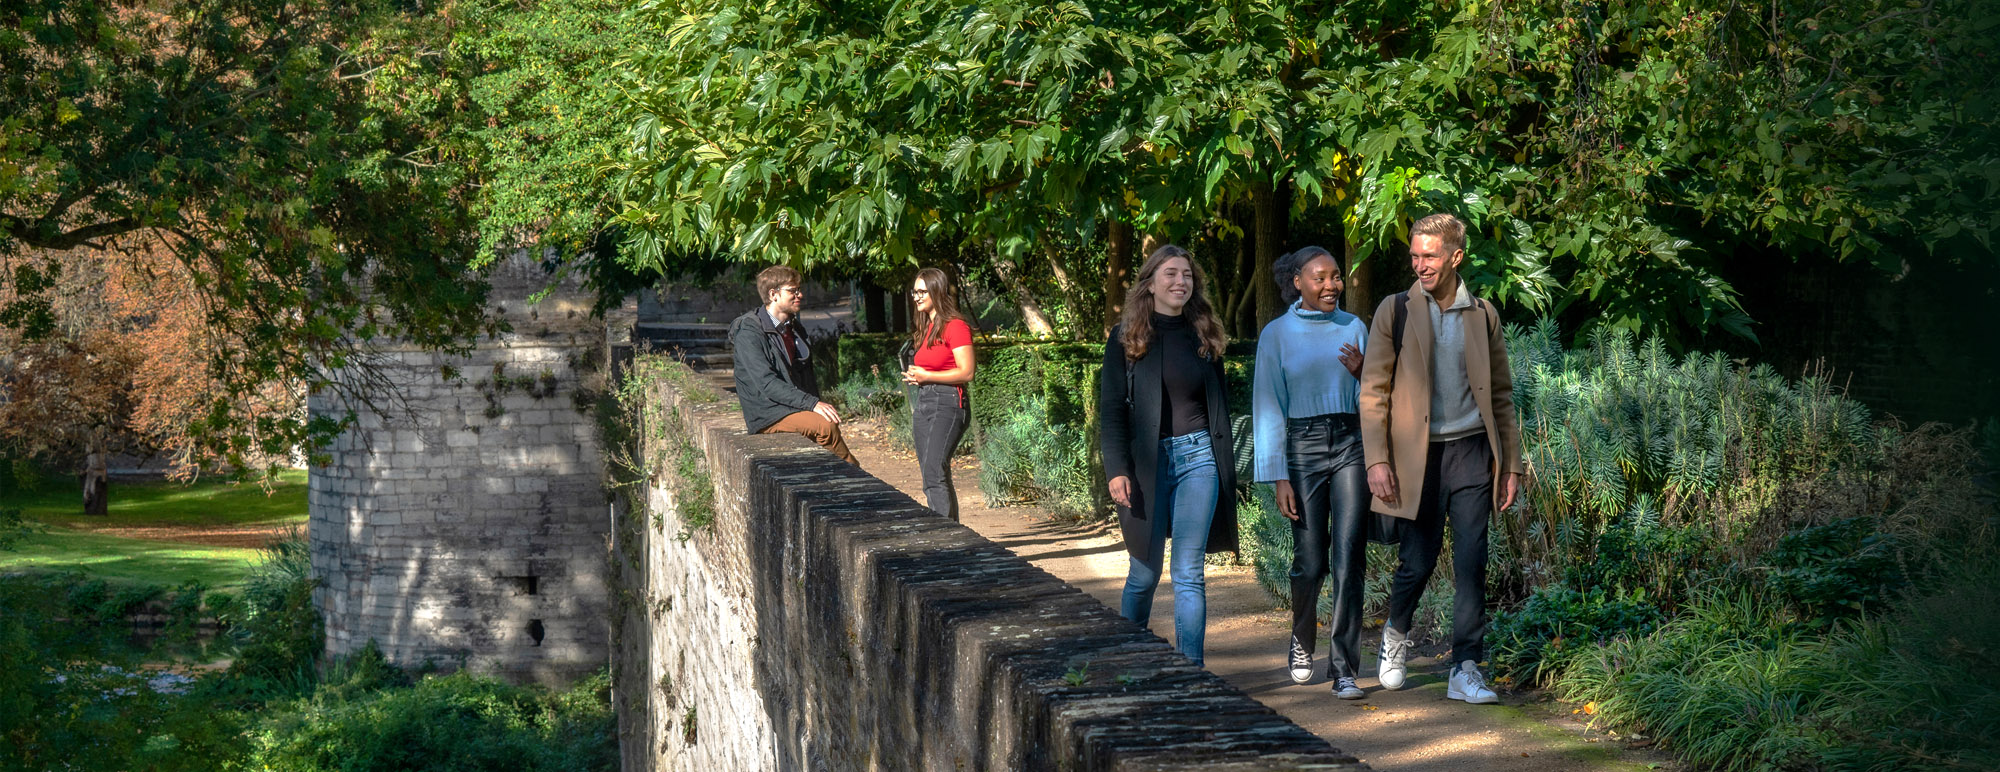 Students on city wall